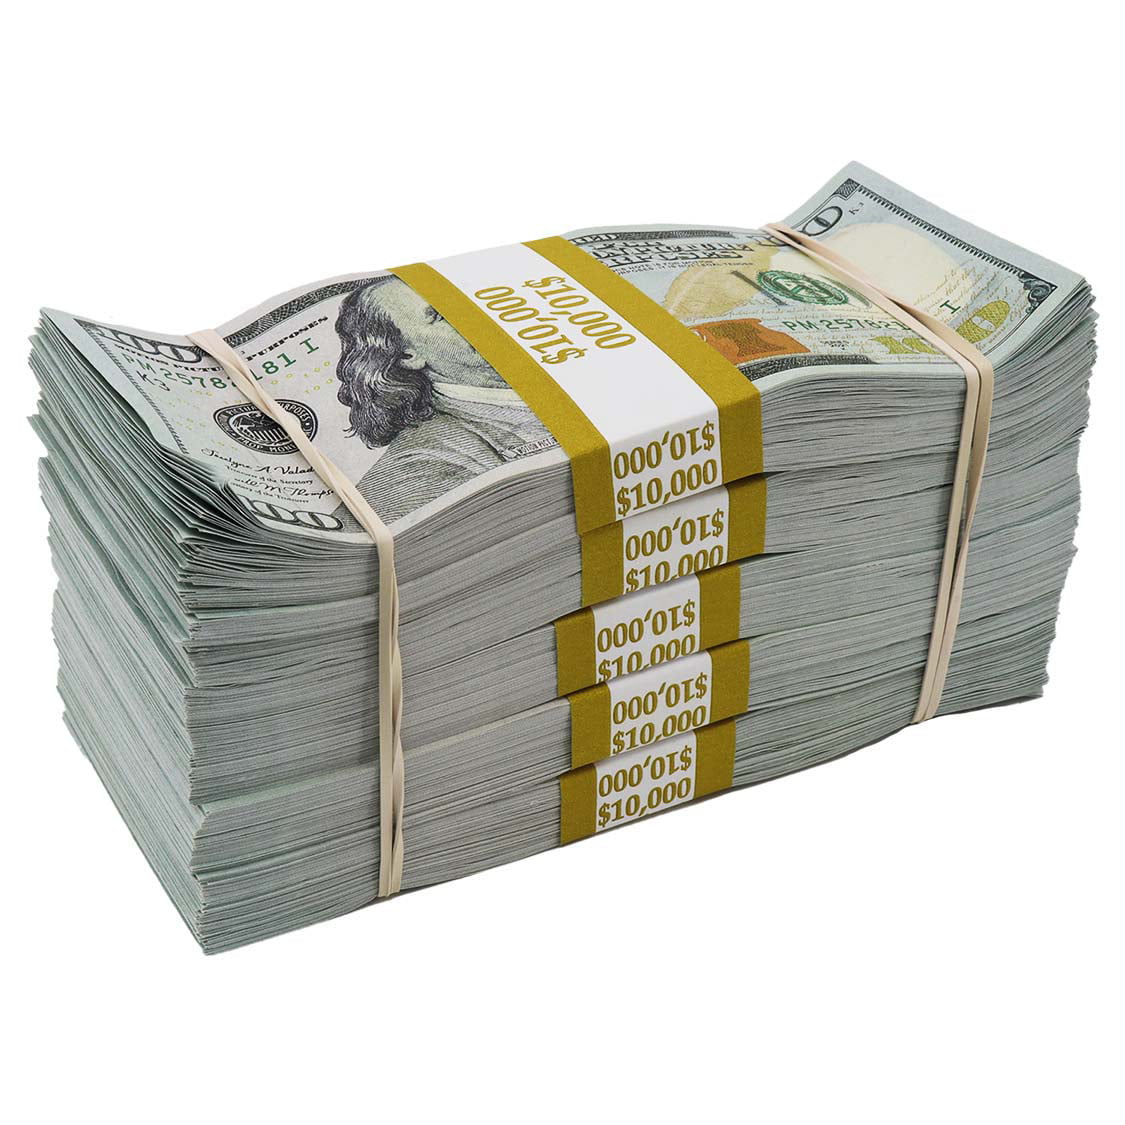 New Series $50,000 Aged Full Print Stacks with Money Bag